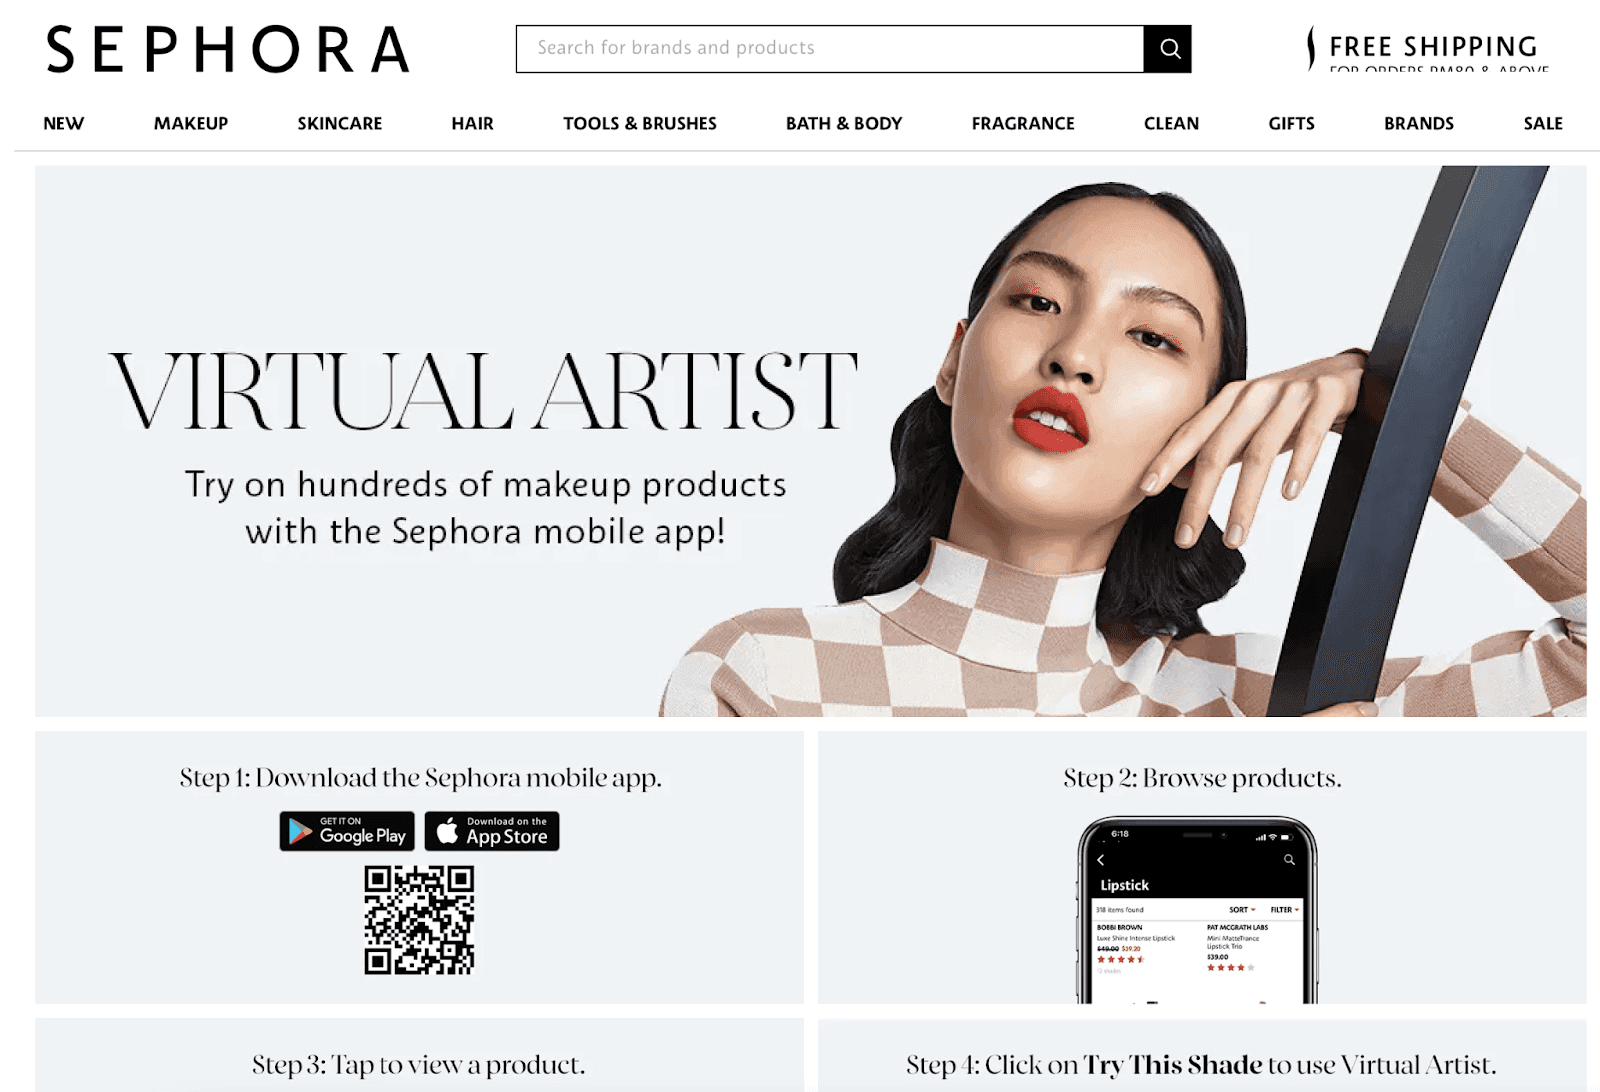 Sephora's Visual Artist AI tool allows individuals to try products with ease